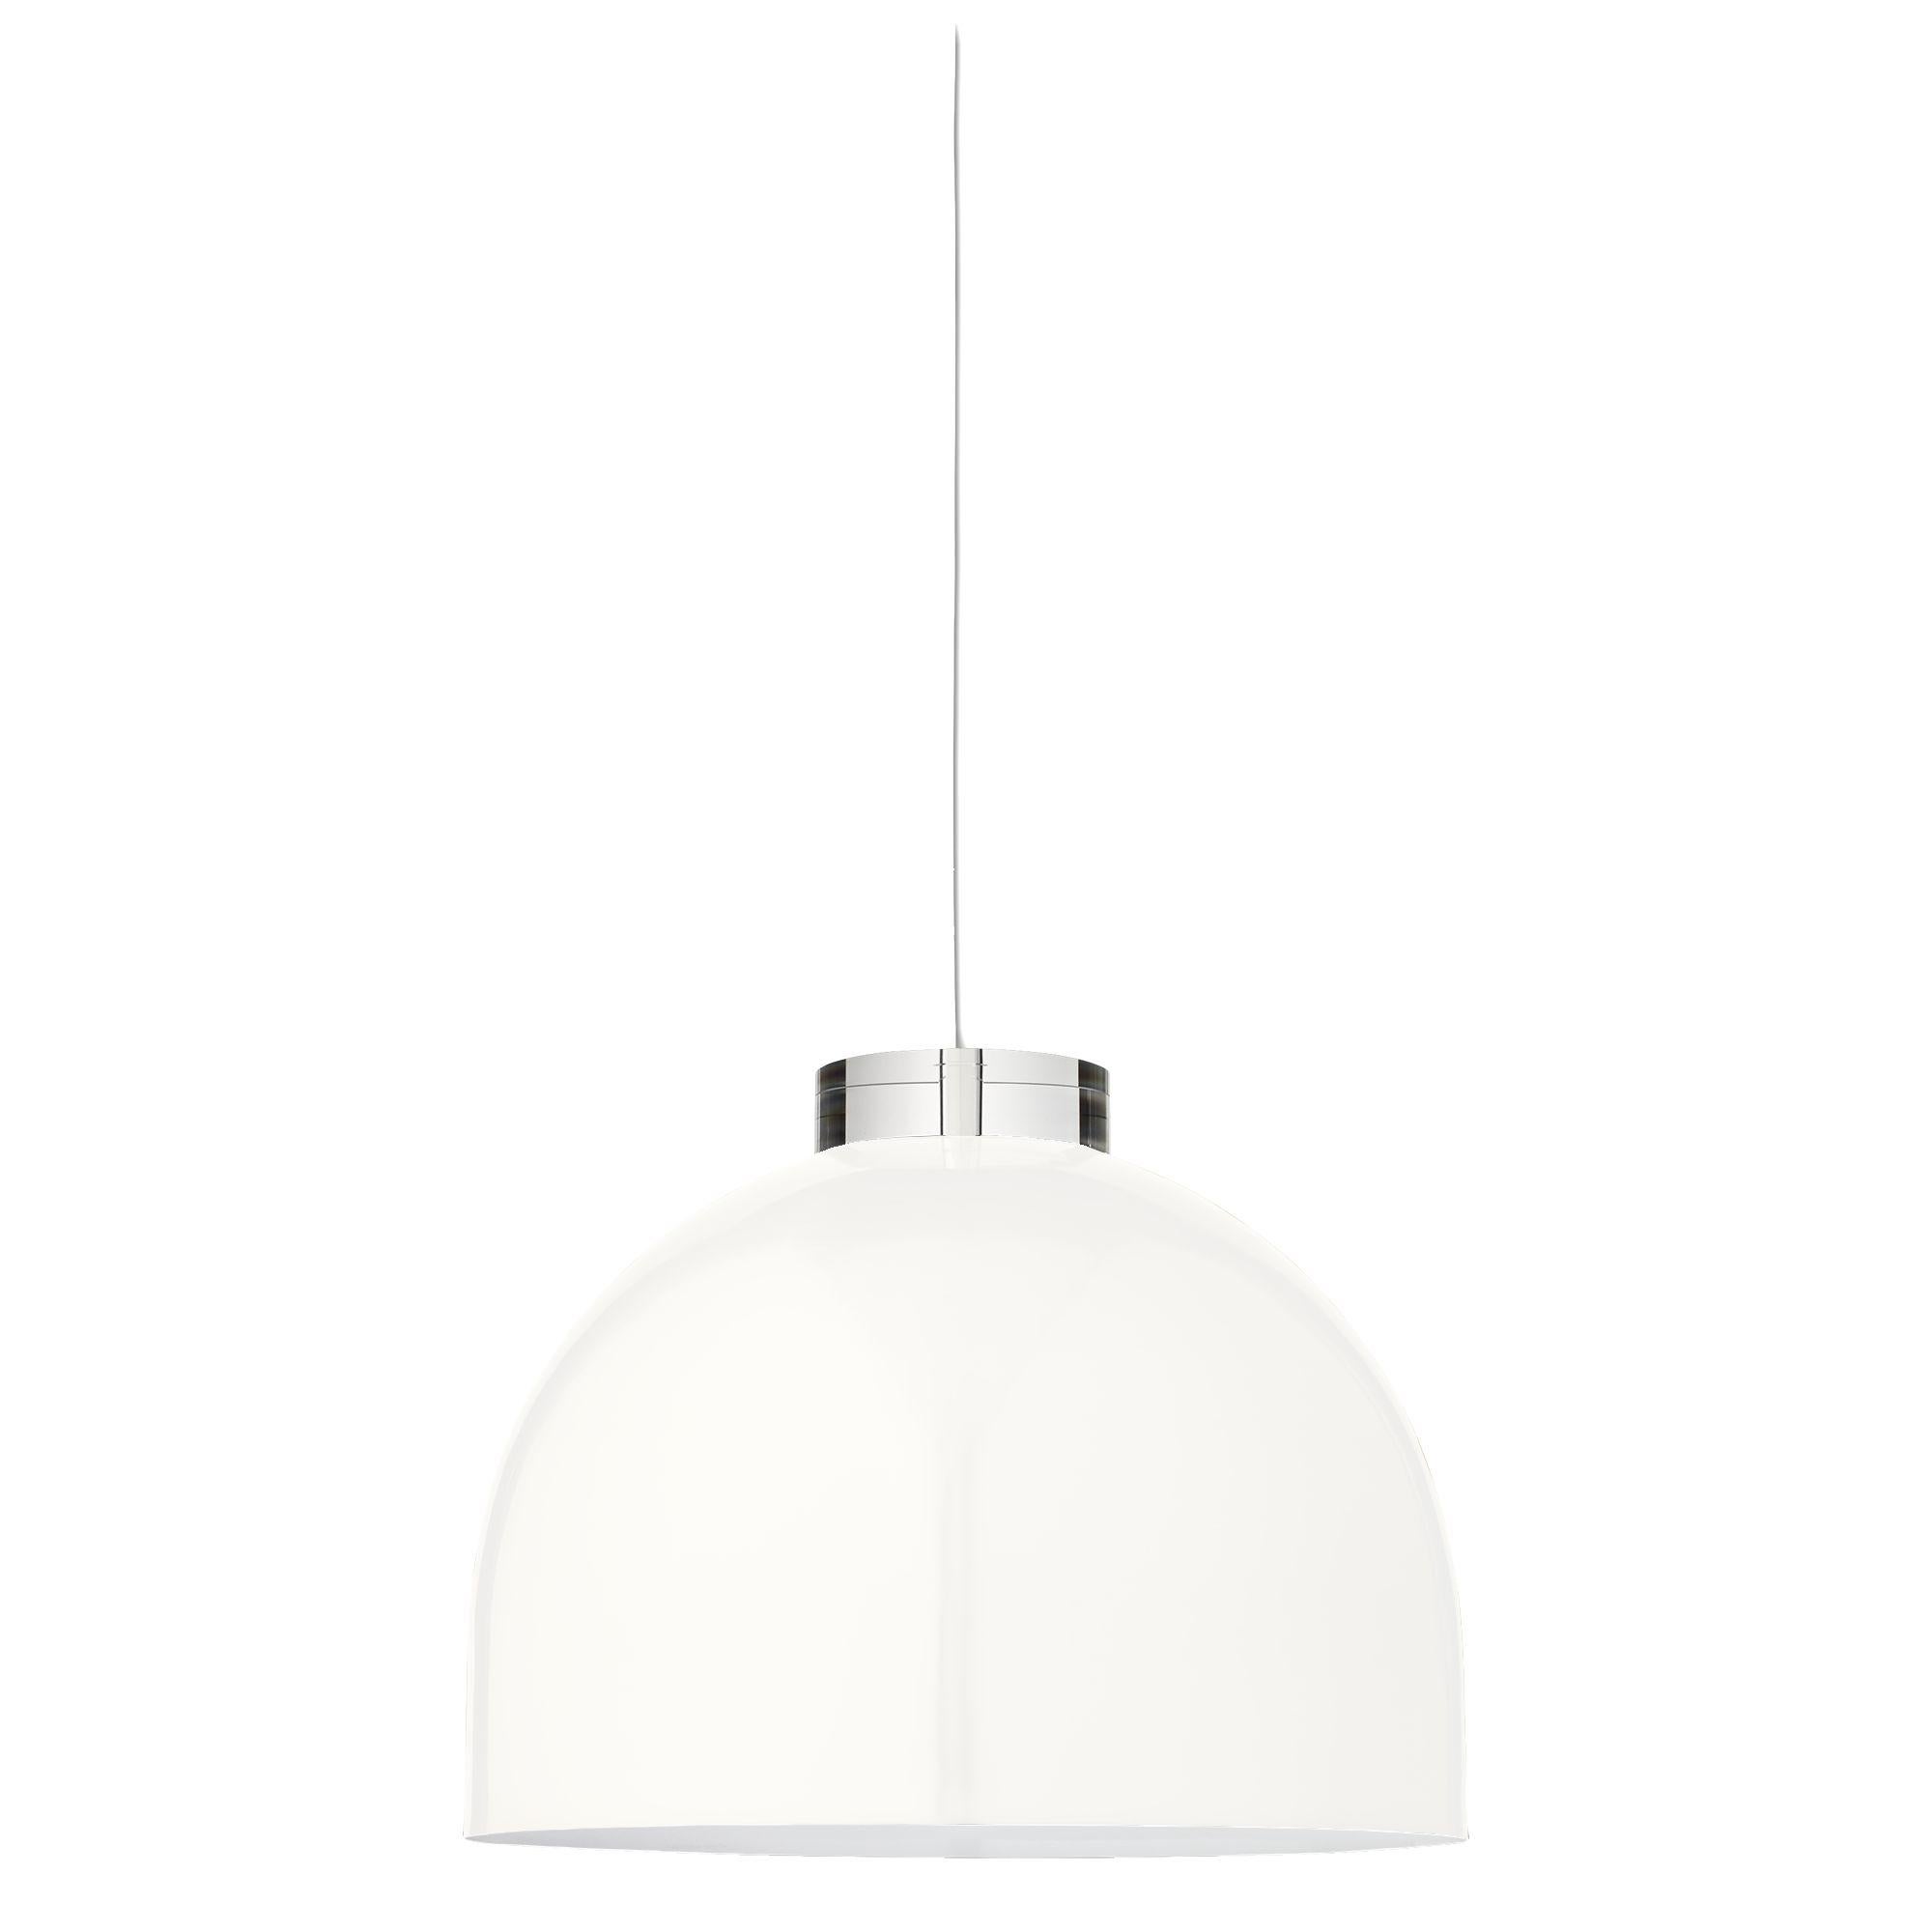 Large white round pendant lamp
Dimensions: Diameter 45 x height 36 cm
Materials: Glass, iron w. Brass plating & powder coating.
Details: For all lamps, the recommended light source is E27 max 25W&220/240 voltage. We recommend LED in order to avoid